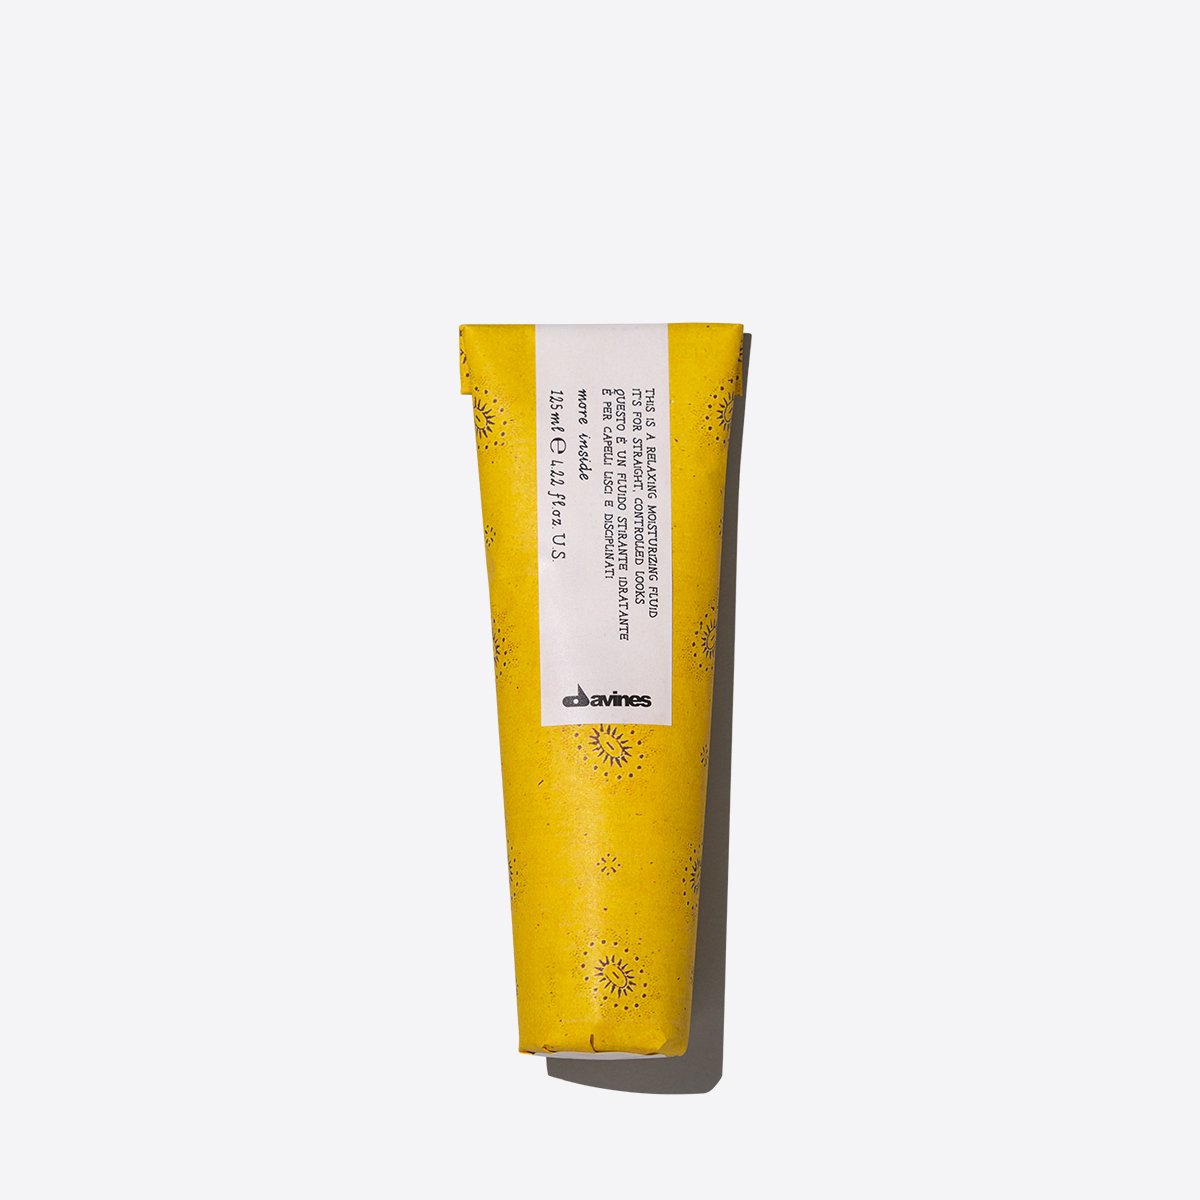 This is a Relaxing Moisturizing Fluid by Davines